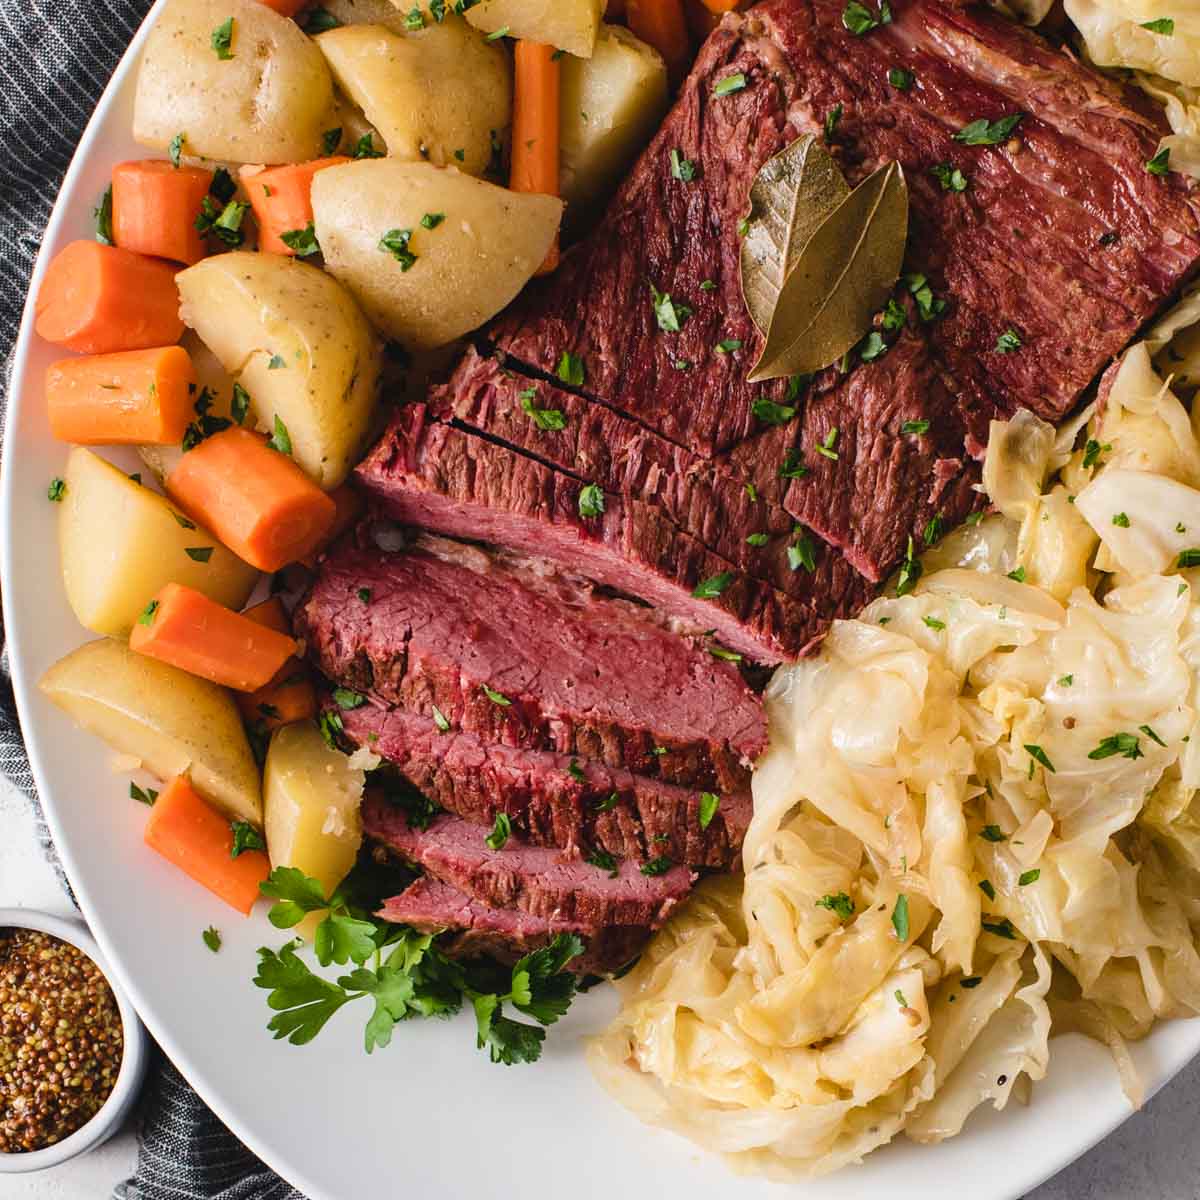 https://feastingnotfasting.com/wp-content/uploads/2023/03/Dutch-Oven-Corned-Beef-and-Cabbage-Recipe-15-2.jpg